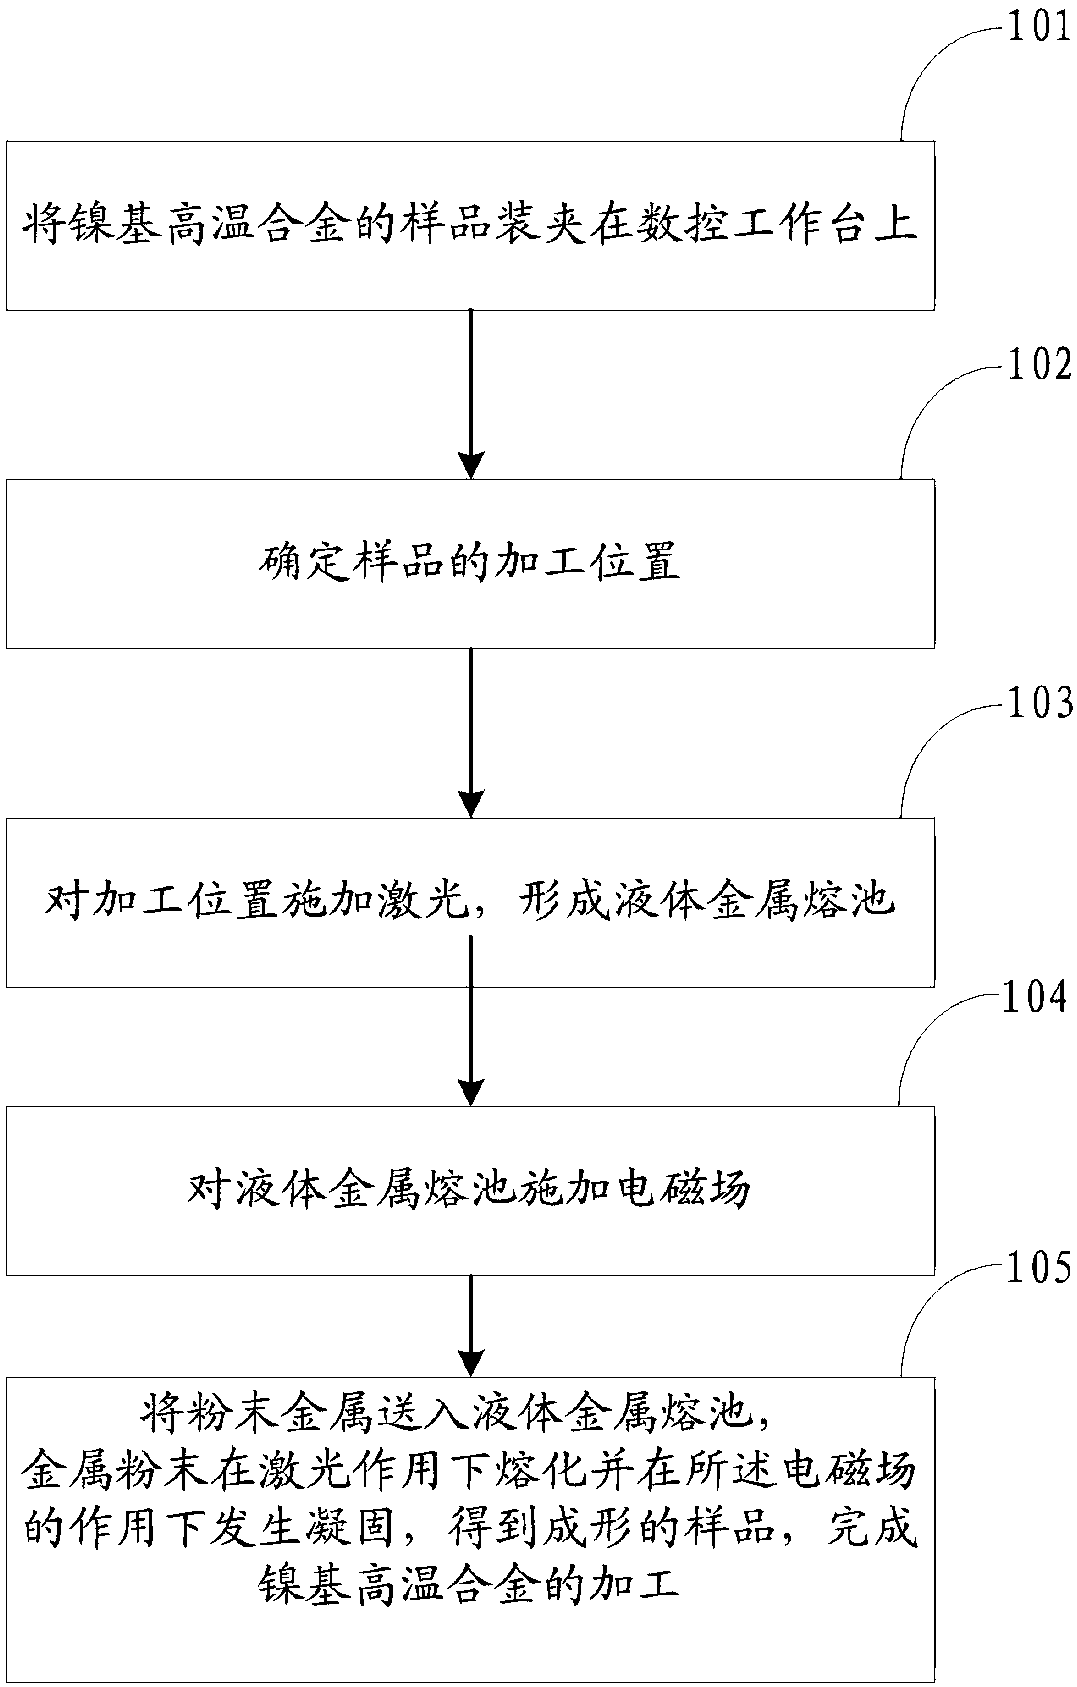 Method and device for controlling nickel-based high-temperature alloy brittle phase during laser additive manufacturing